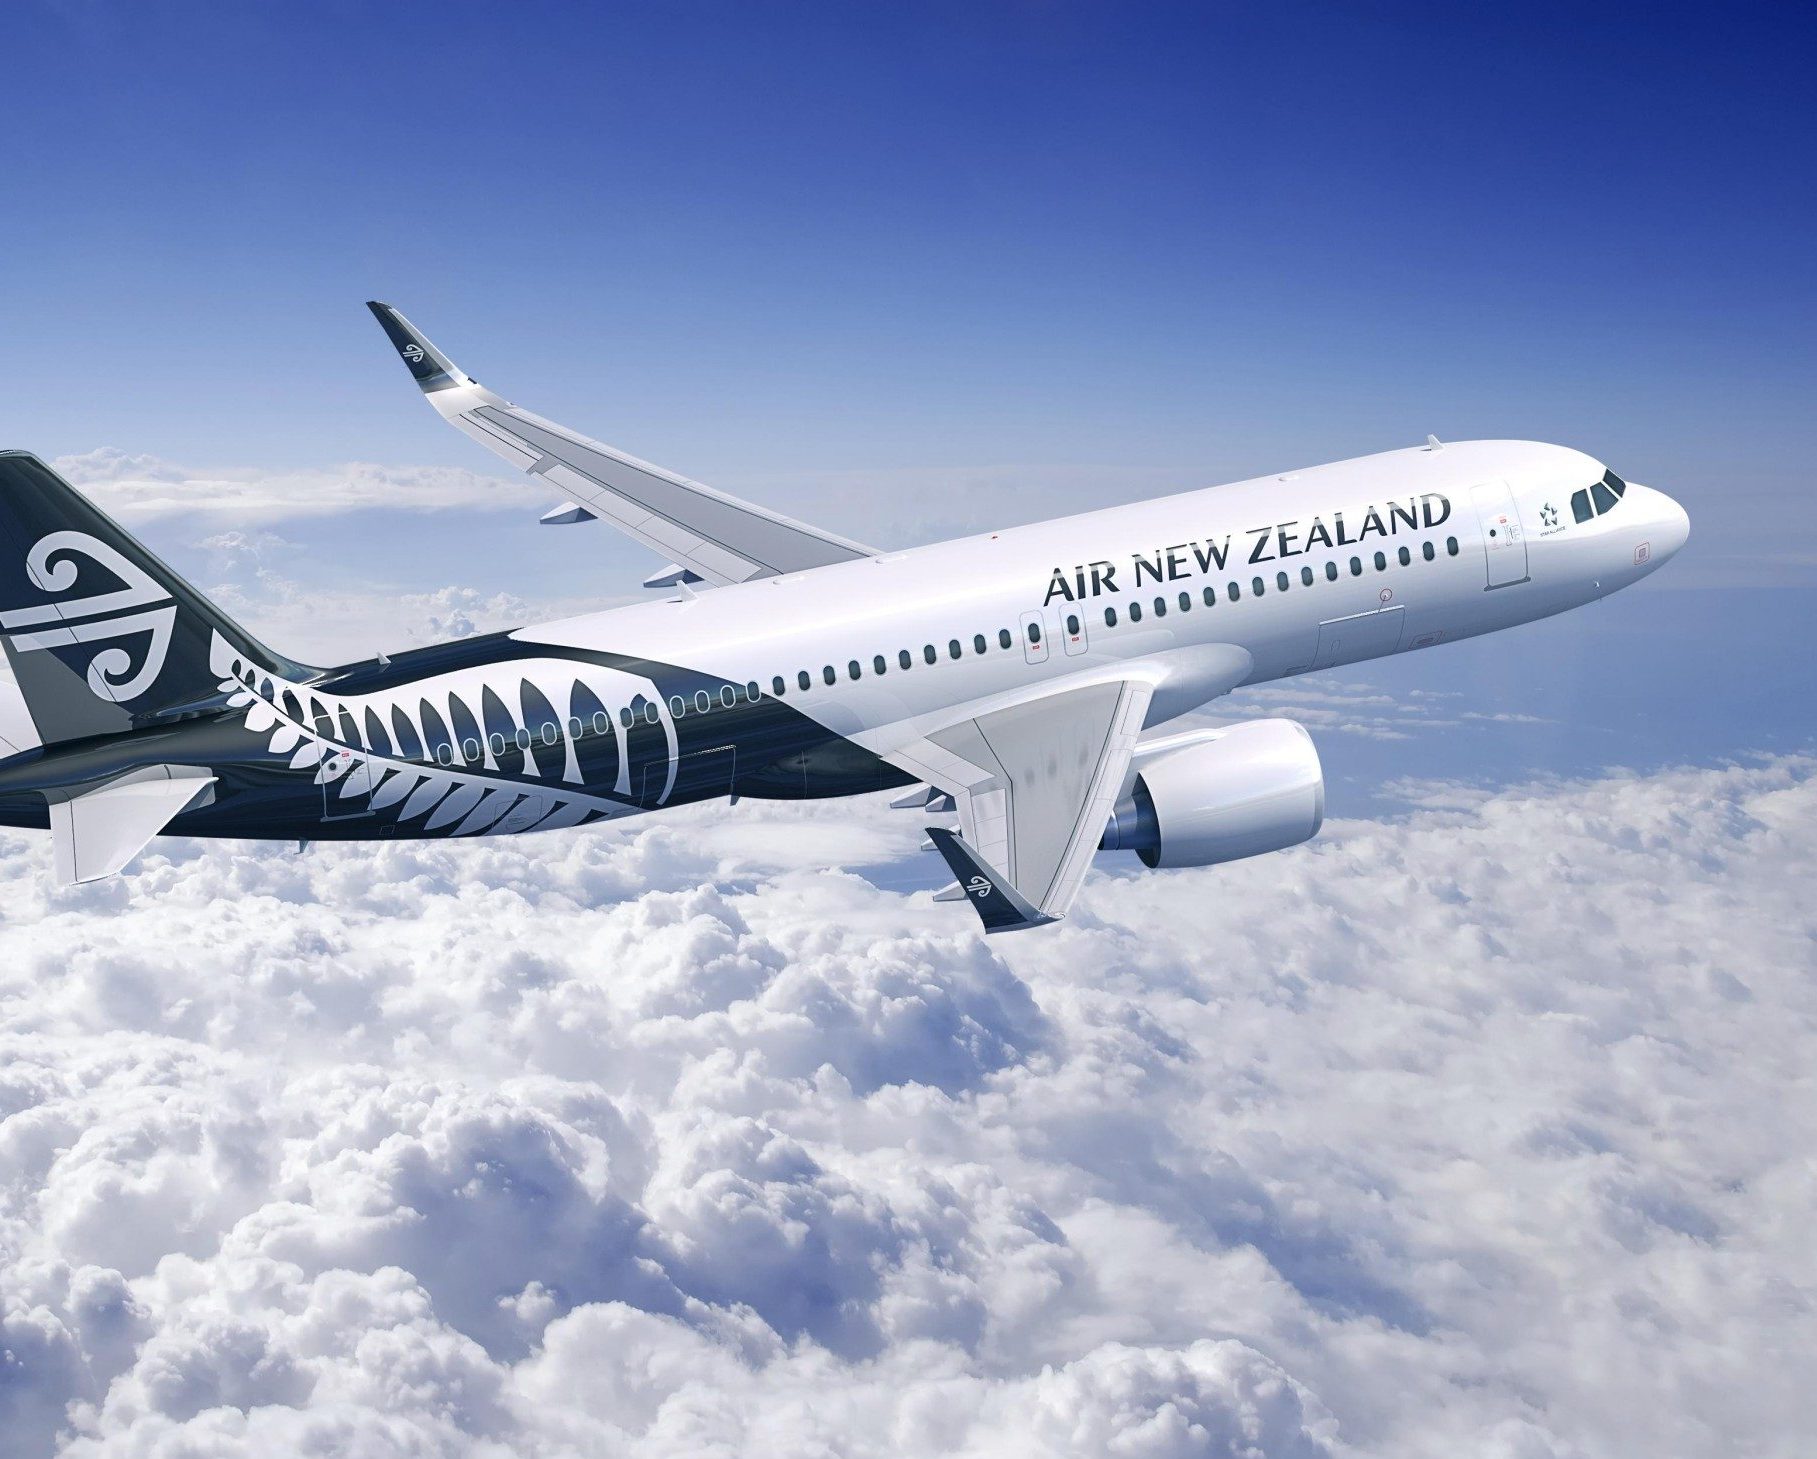 a320neo_air_new_zealand